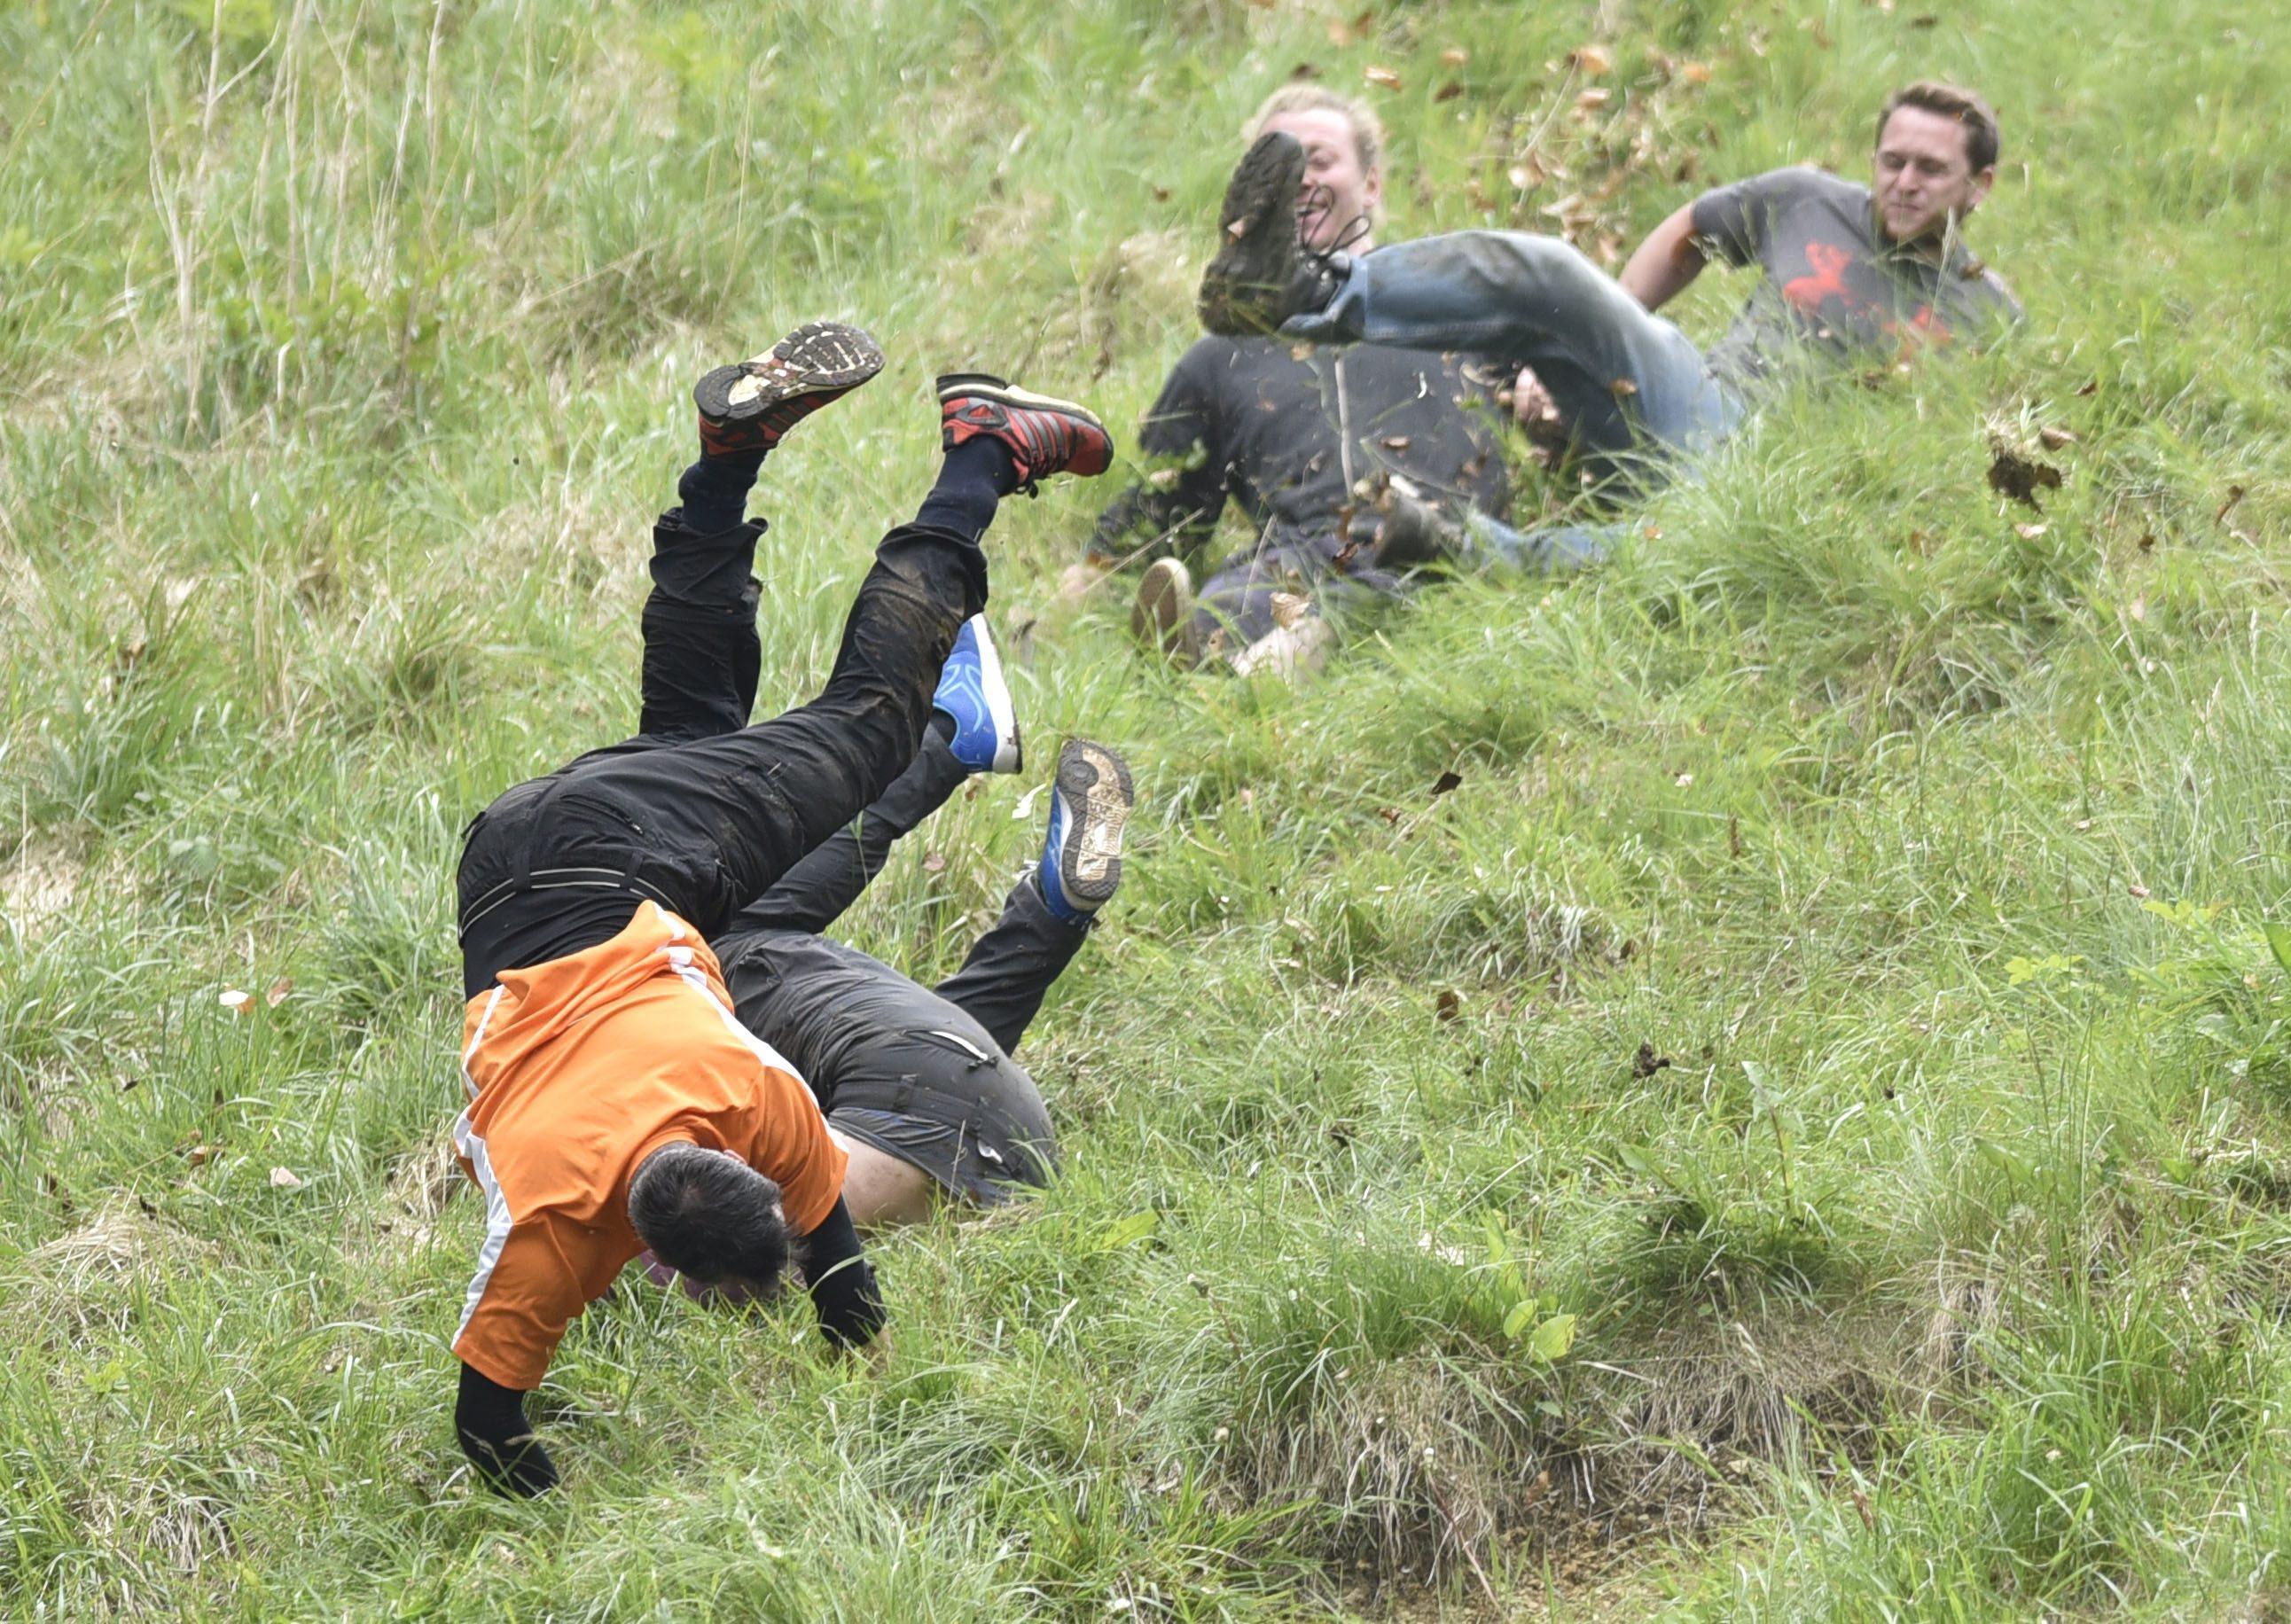 Gloucestershire cheese rolling